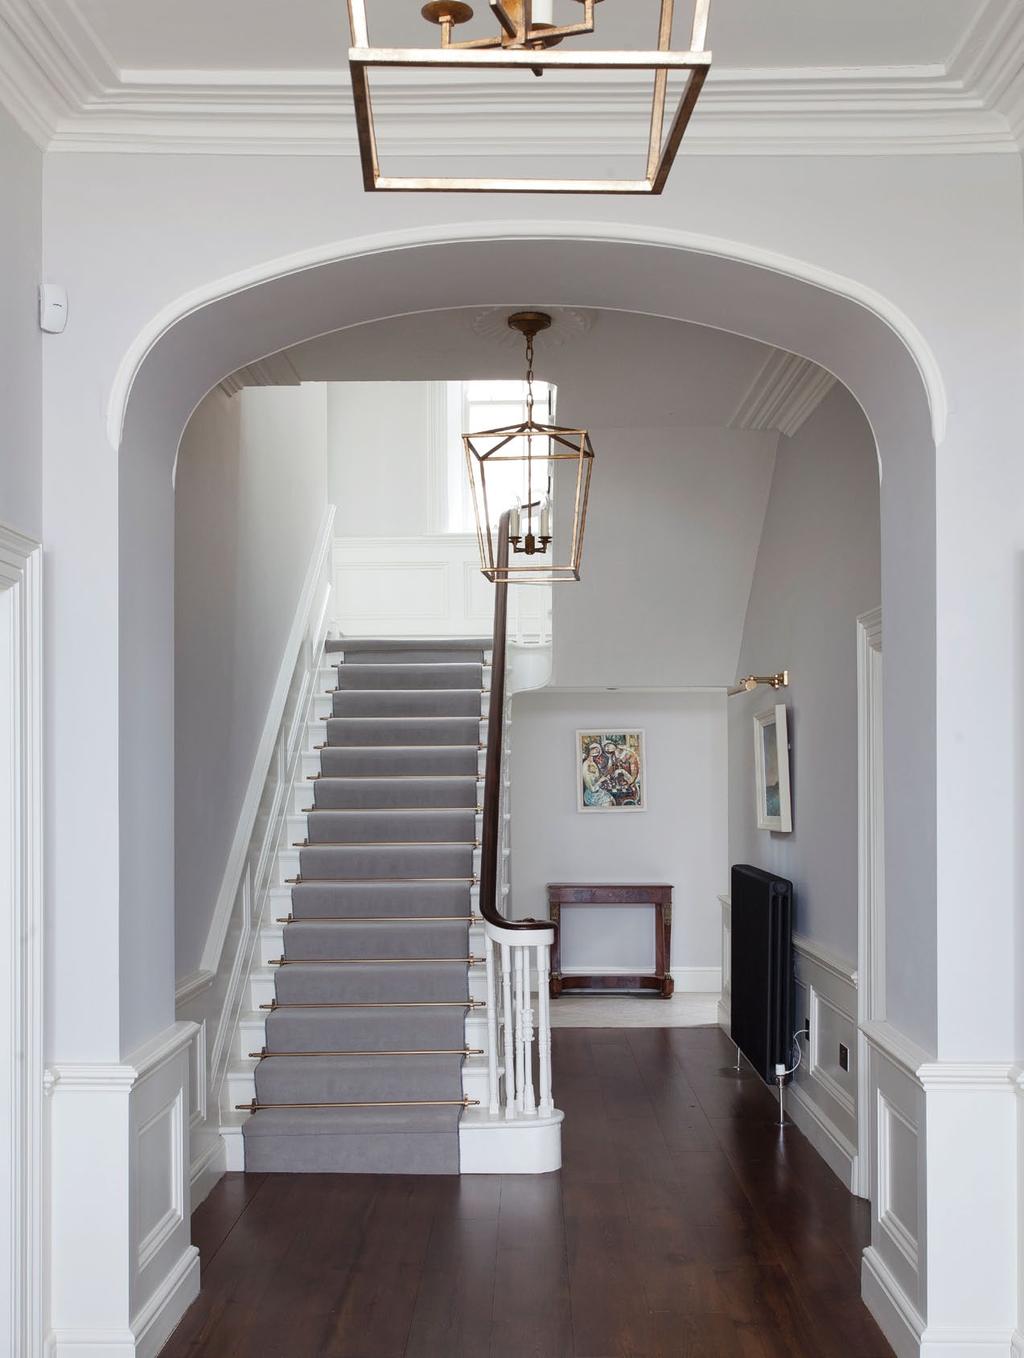 The grand entrance hall features original period